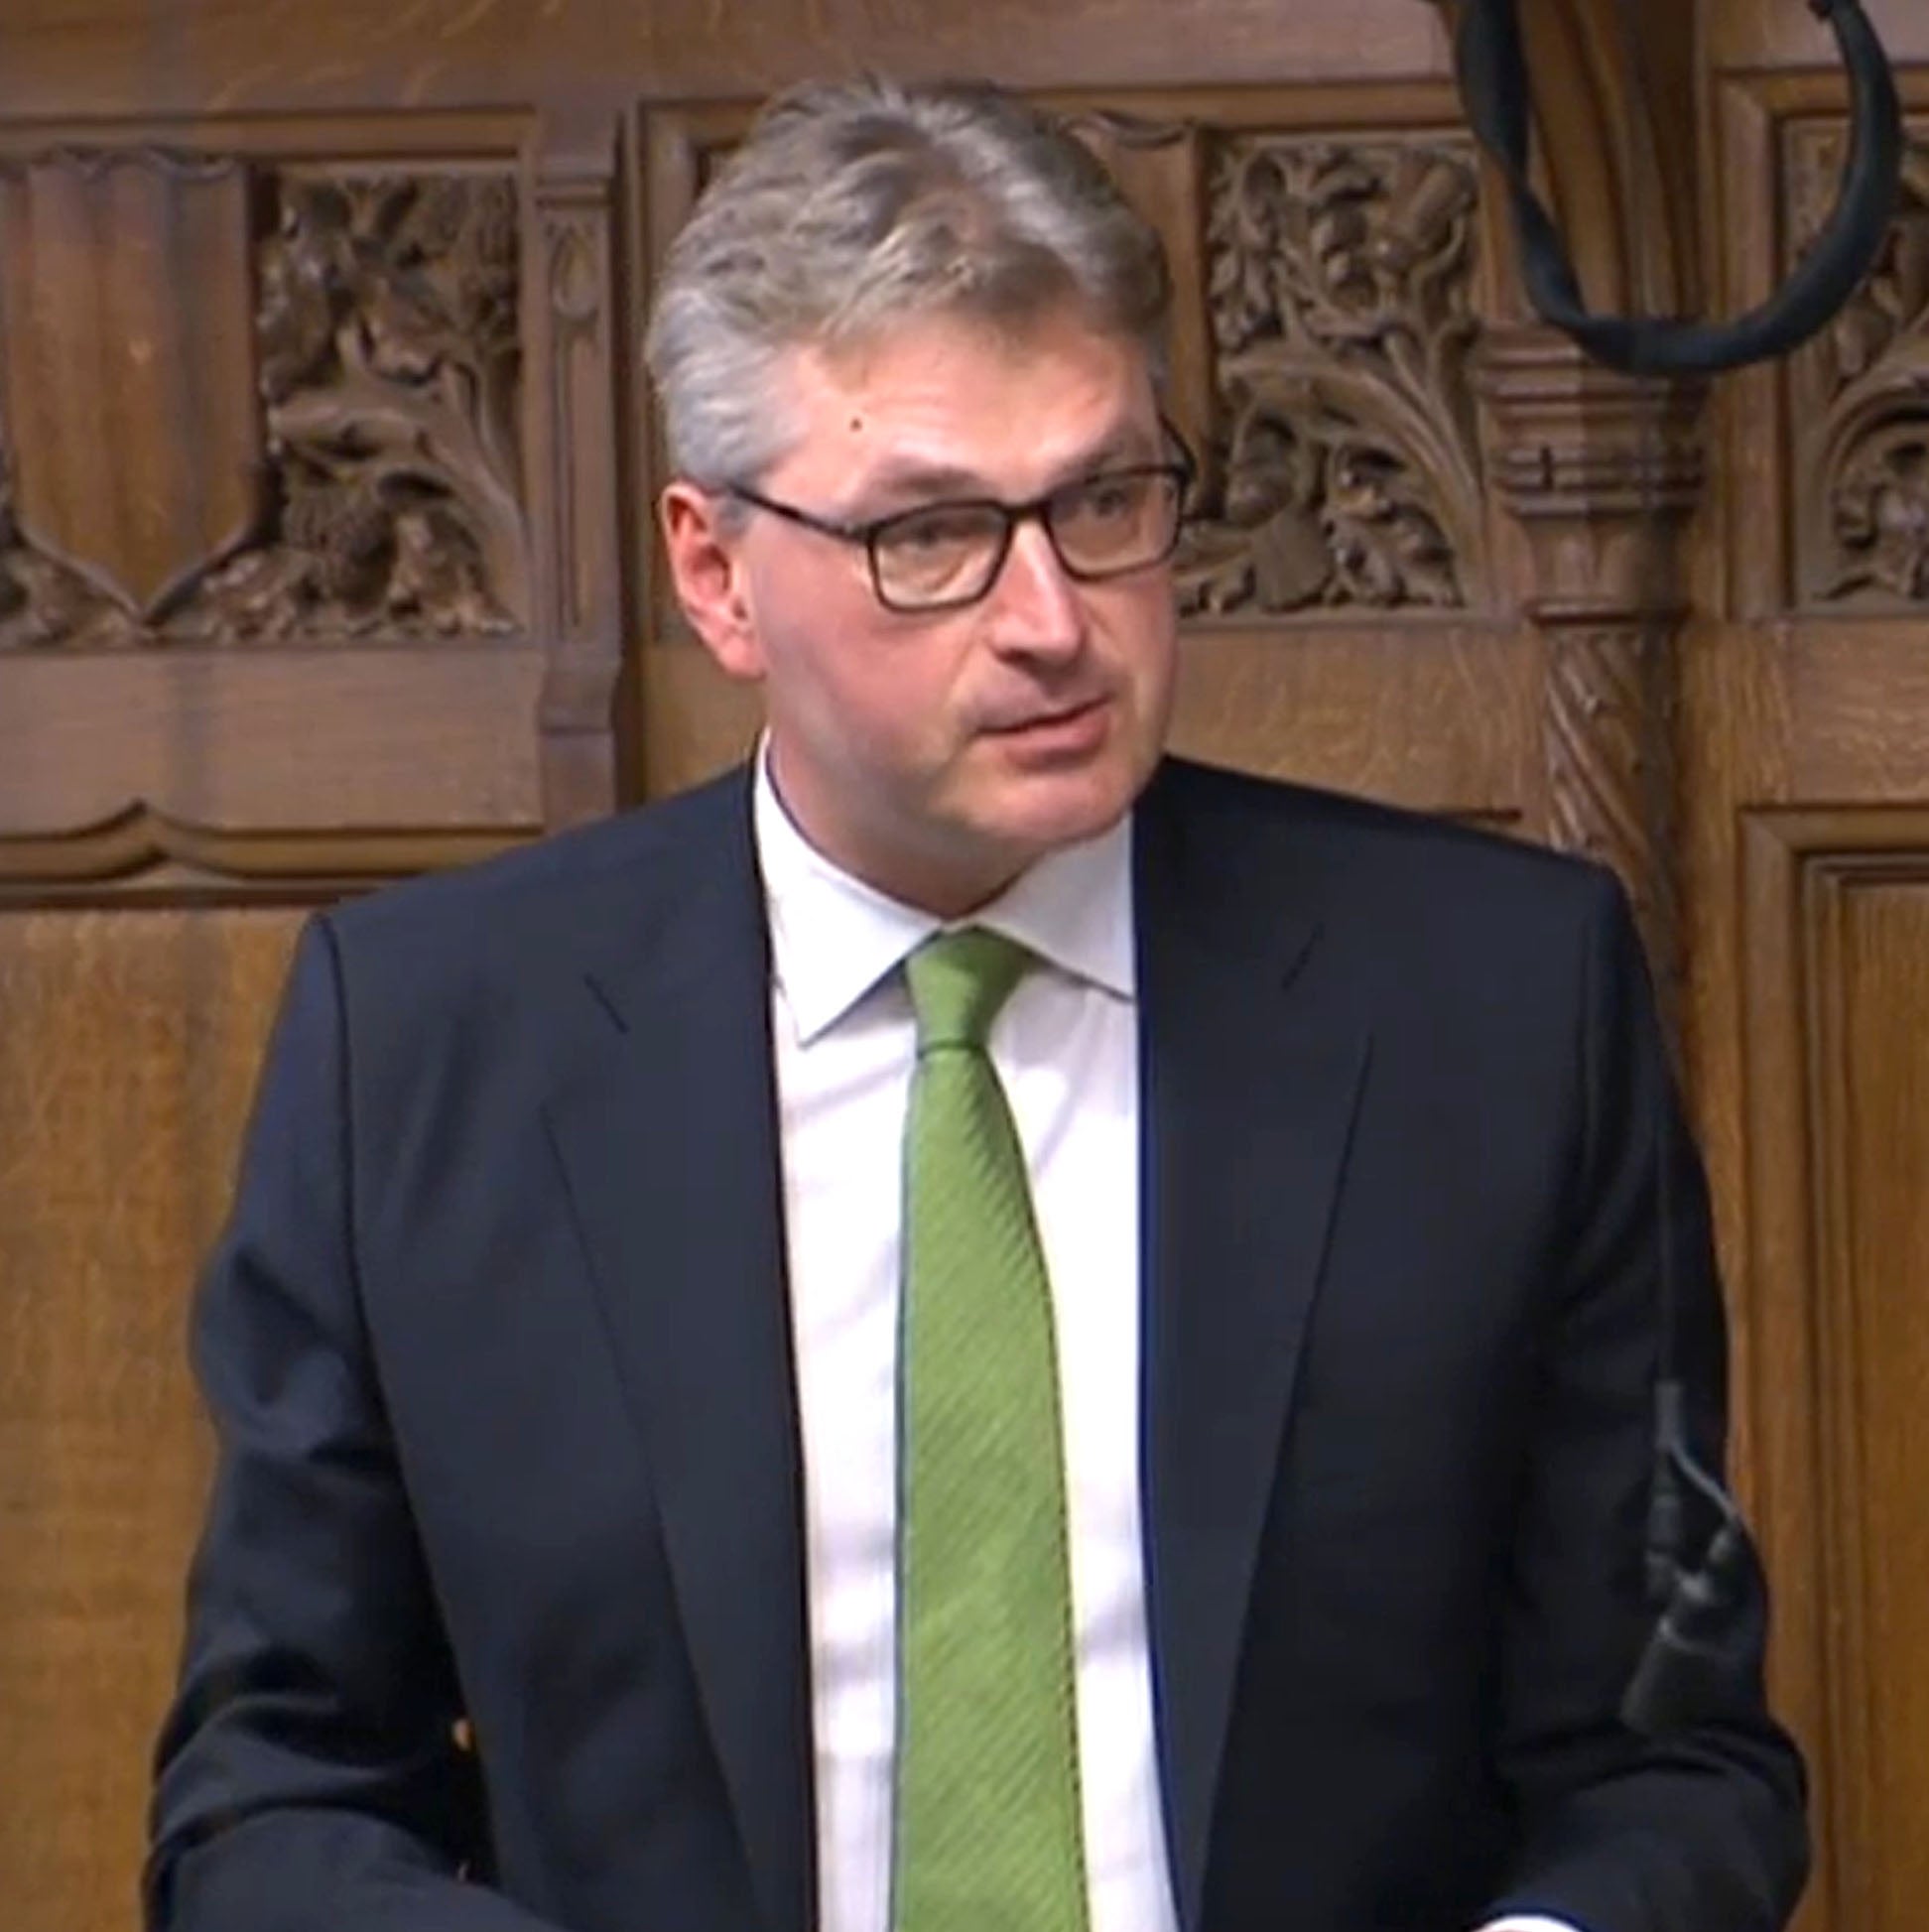 Conservative MP Daniel Kawczynski speaking in the House of Commons when he apologised “unreservedly” for his “bullying” behaviour towards parliamentary committee staff as he struggled with IT issues. (PA)